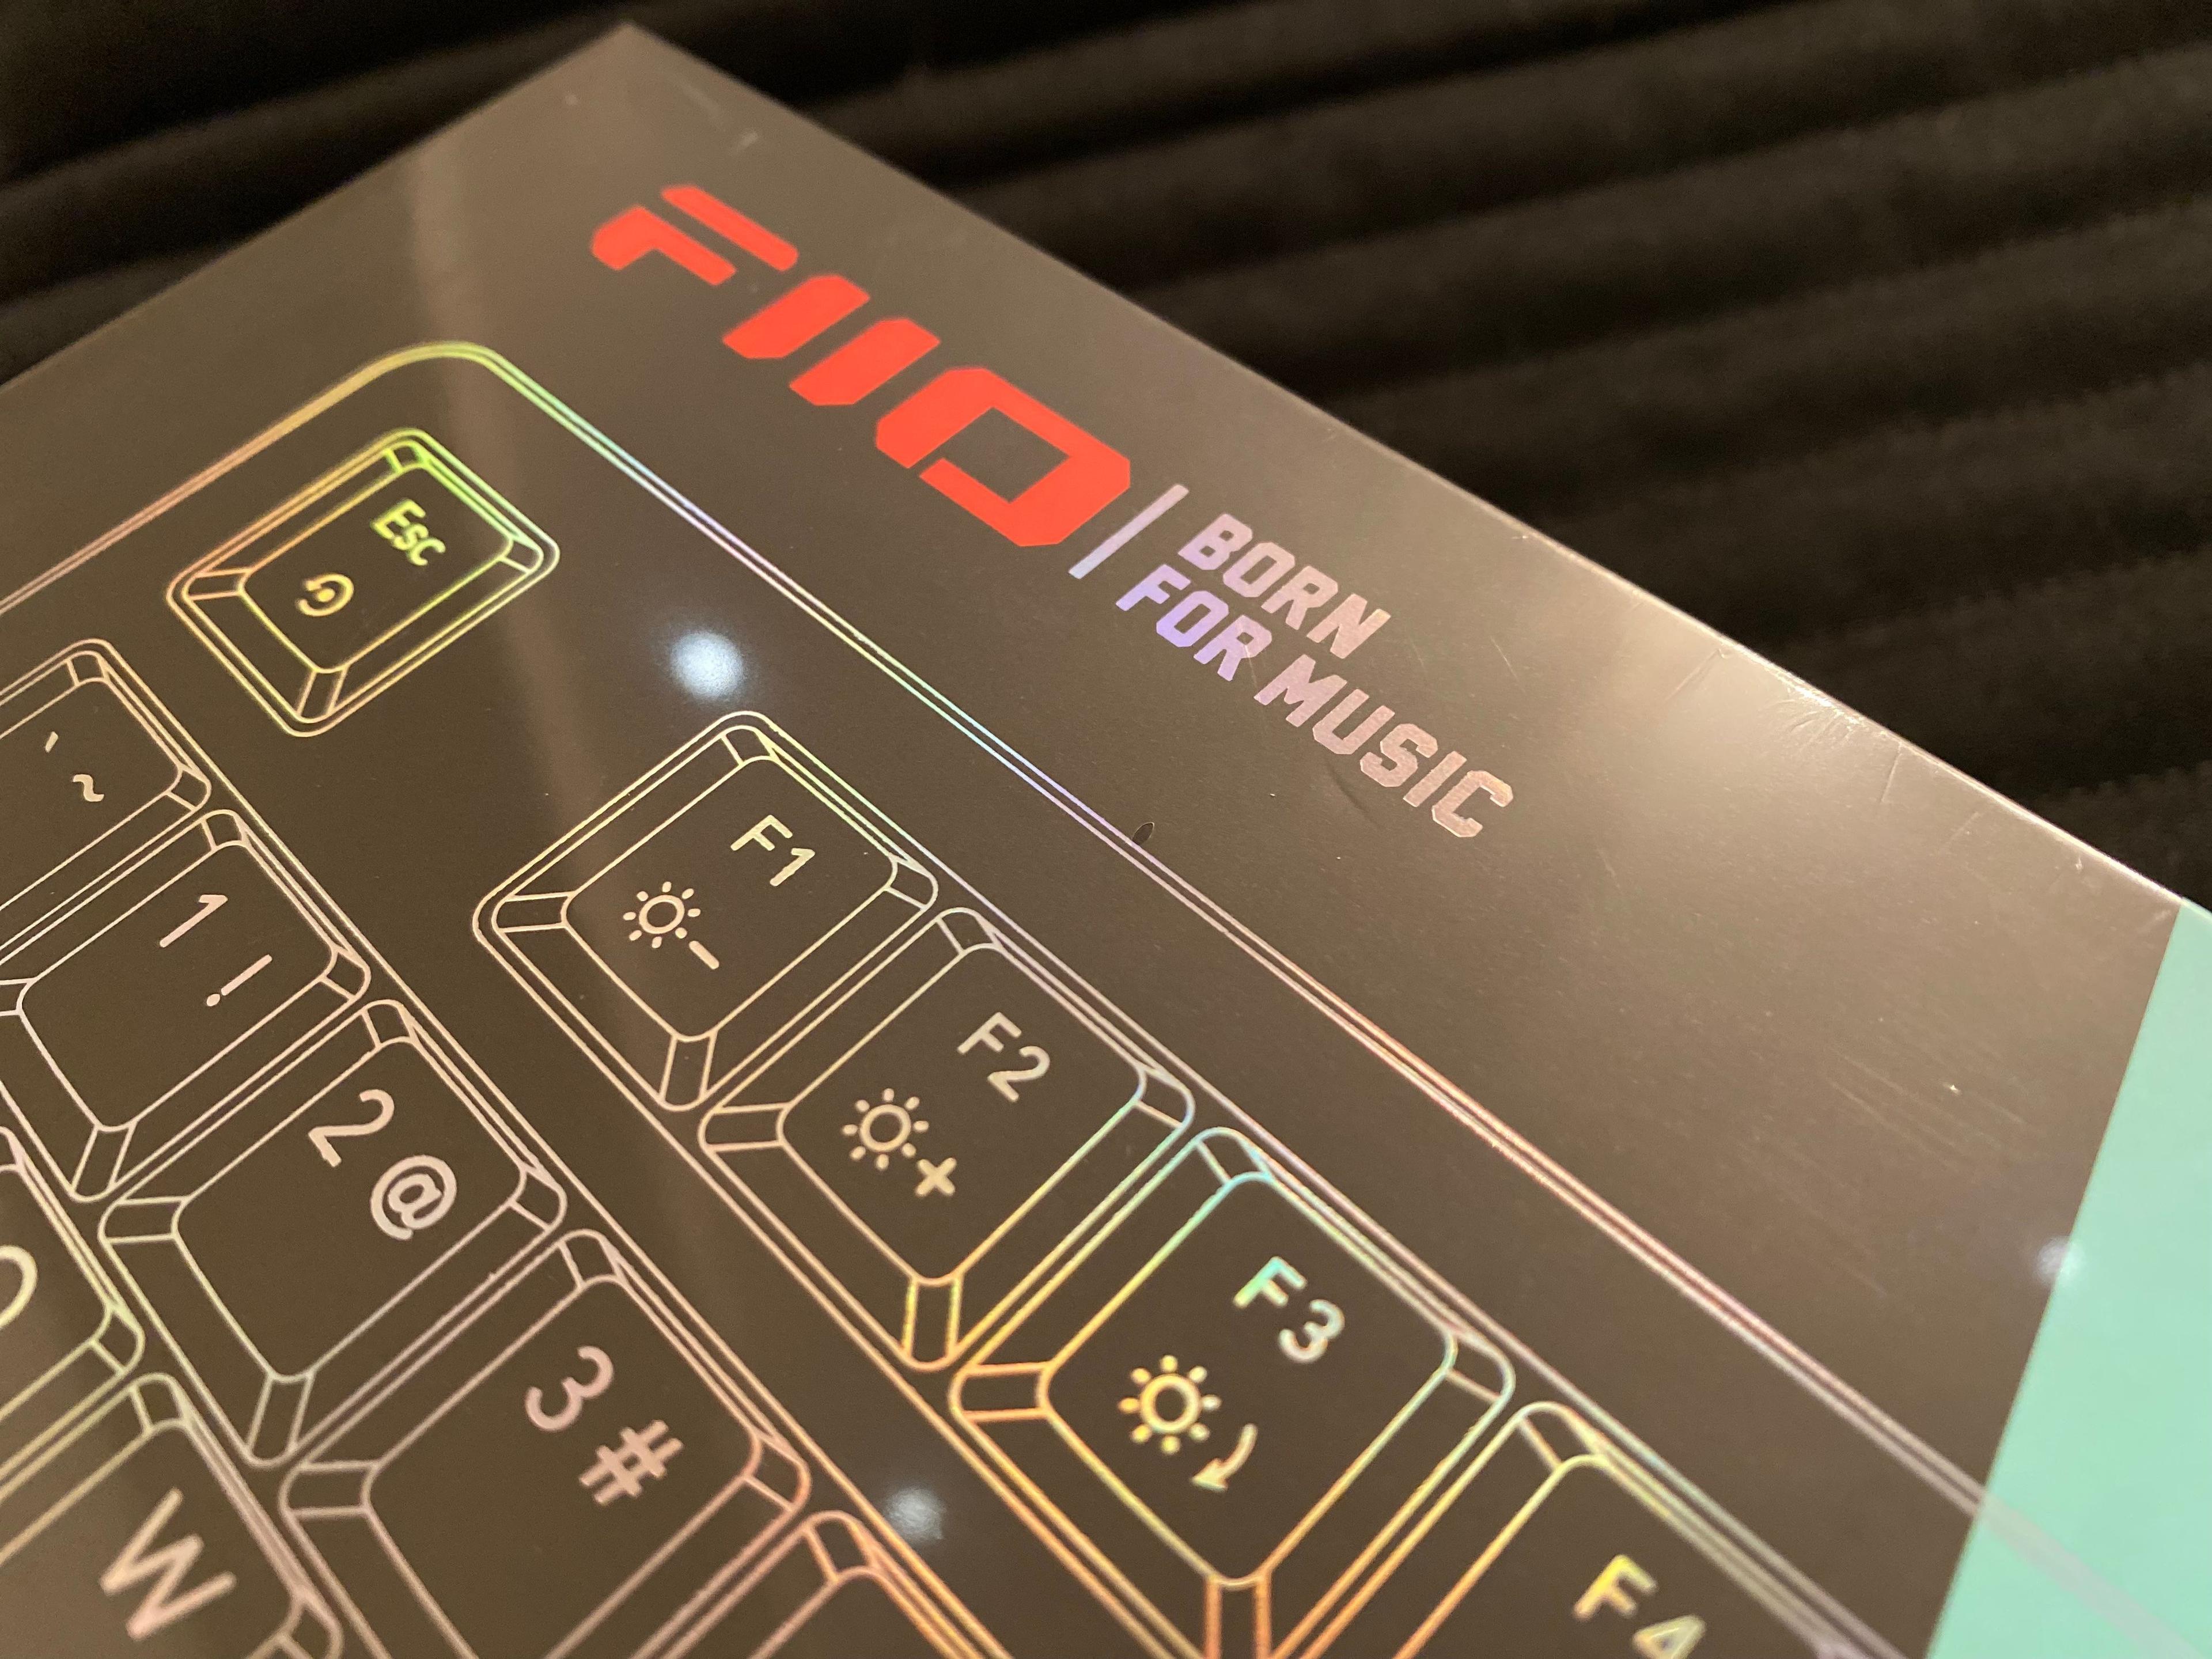 Fiio KB3 Review: The Keyboard That Makes Your Music and Games Come Alive